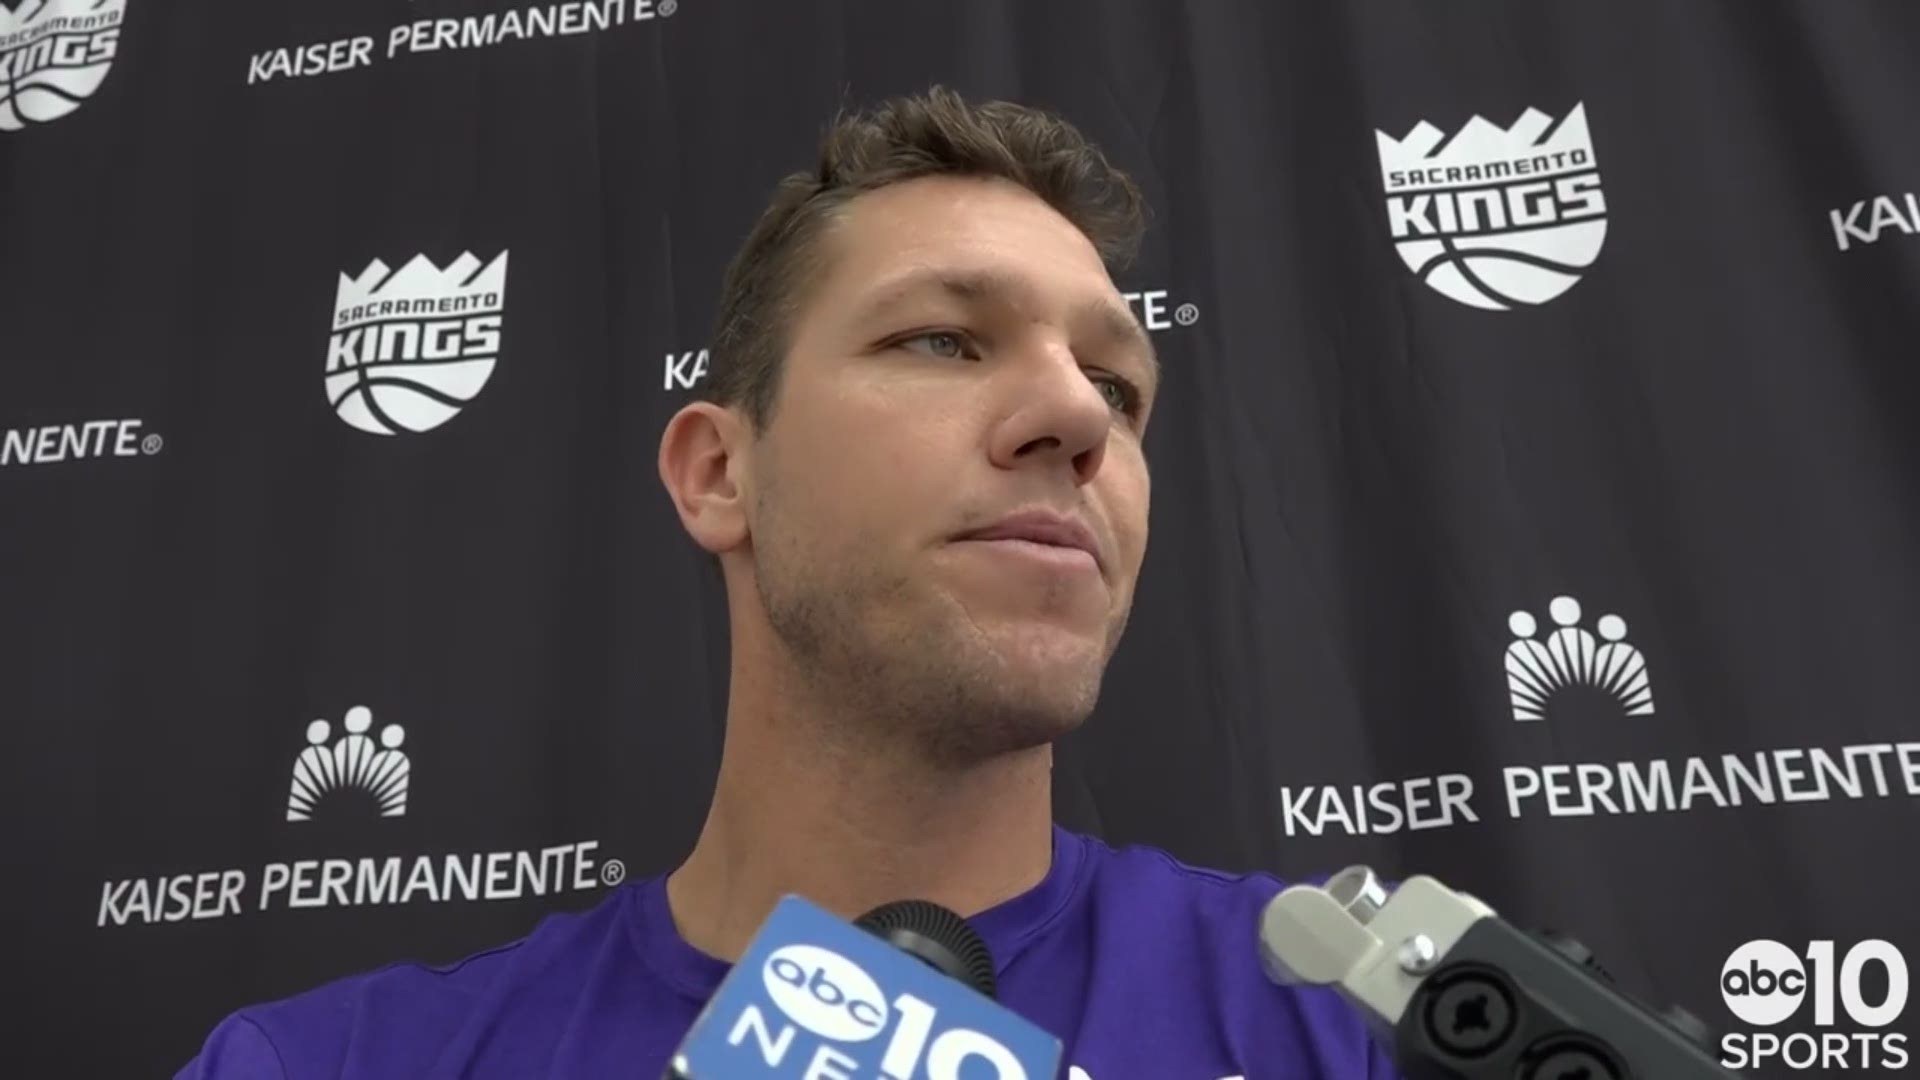 Kings coach Luke Walton talks about Sacramento's 0-4 start to the season following Monday night's loss to the Denver Nuggets & his players taking it personally.